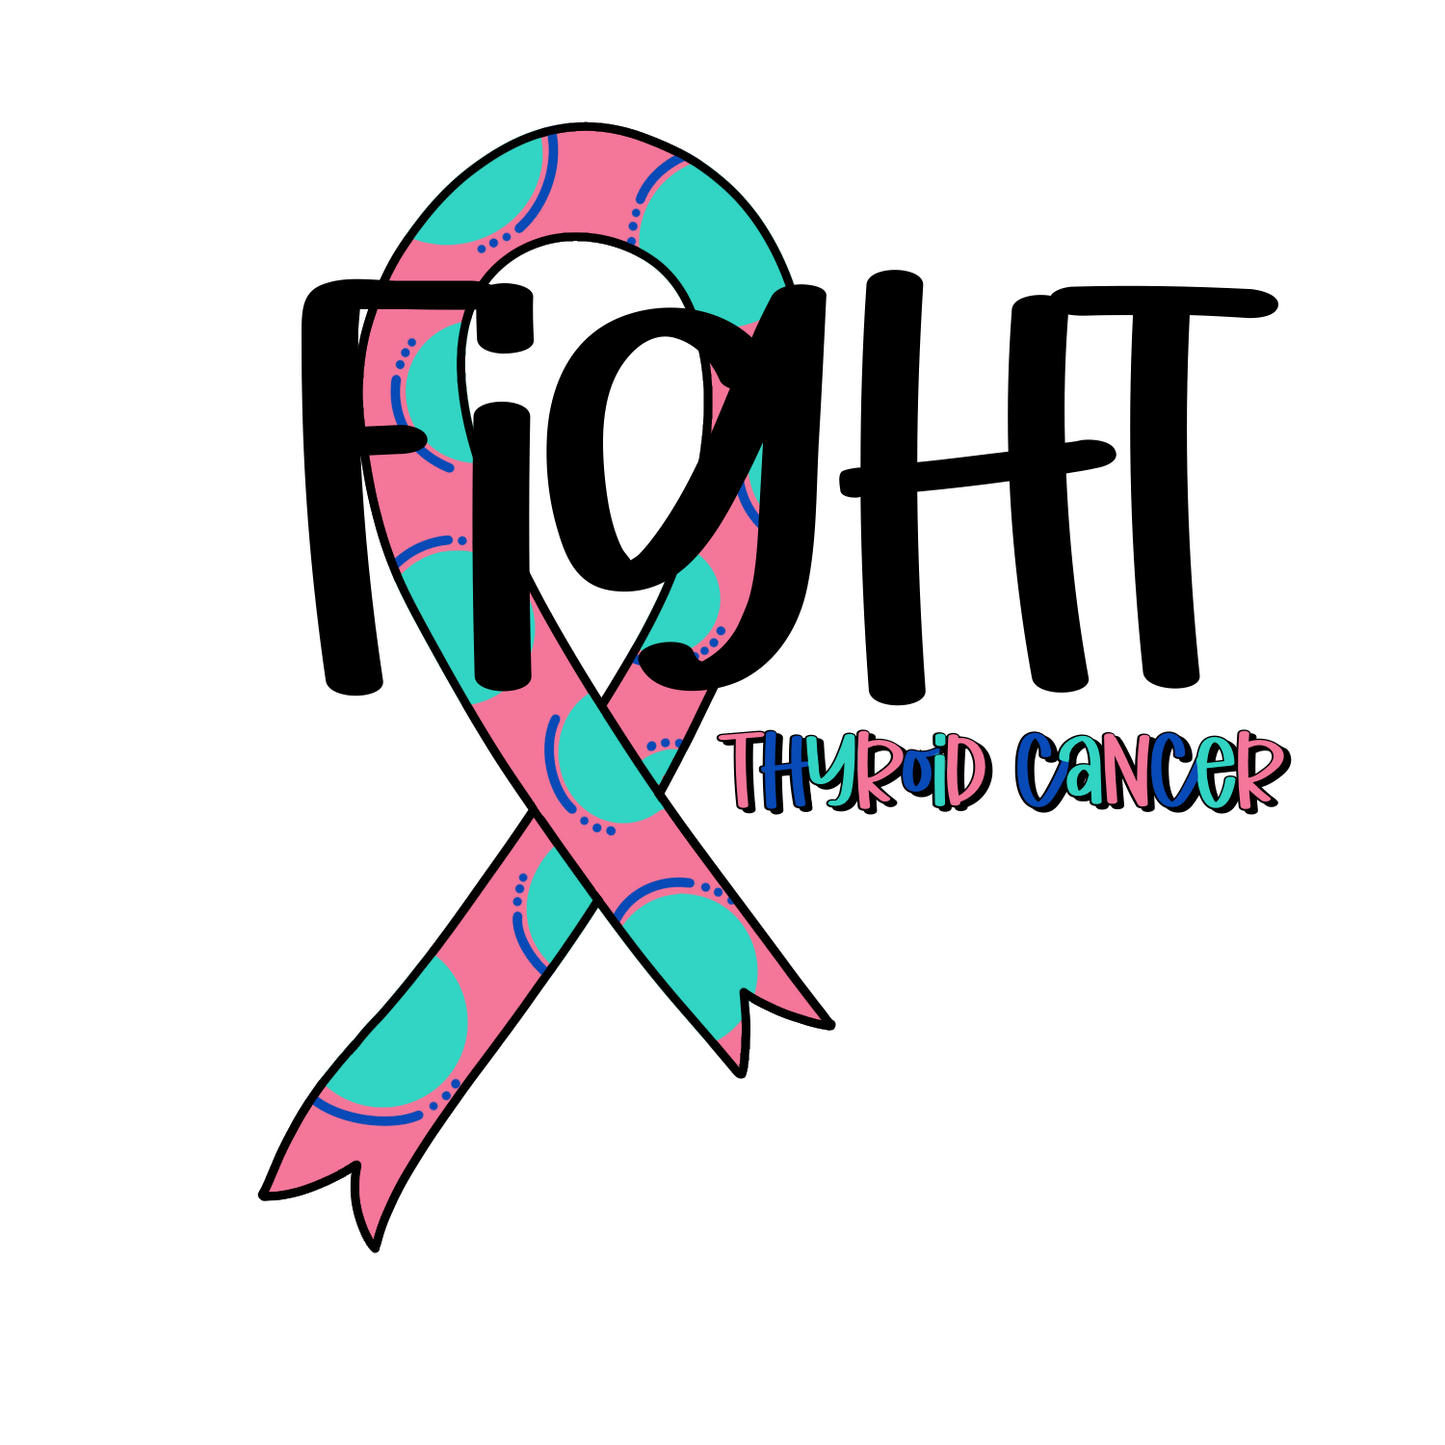 Fight Thyroid Cancer Youth and Adult Sizes Tshirt